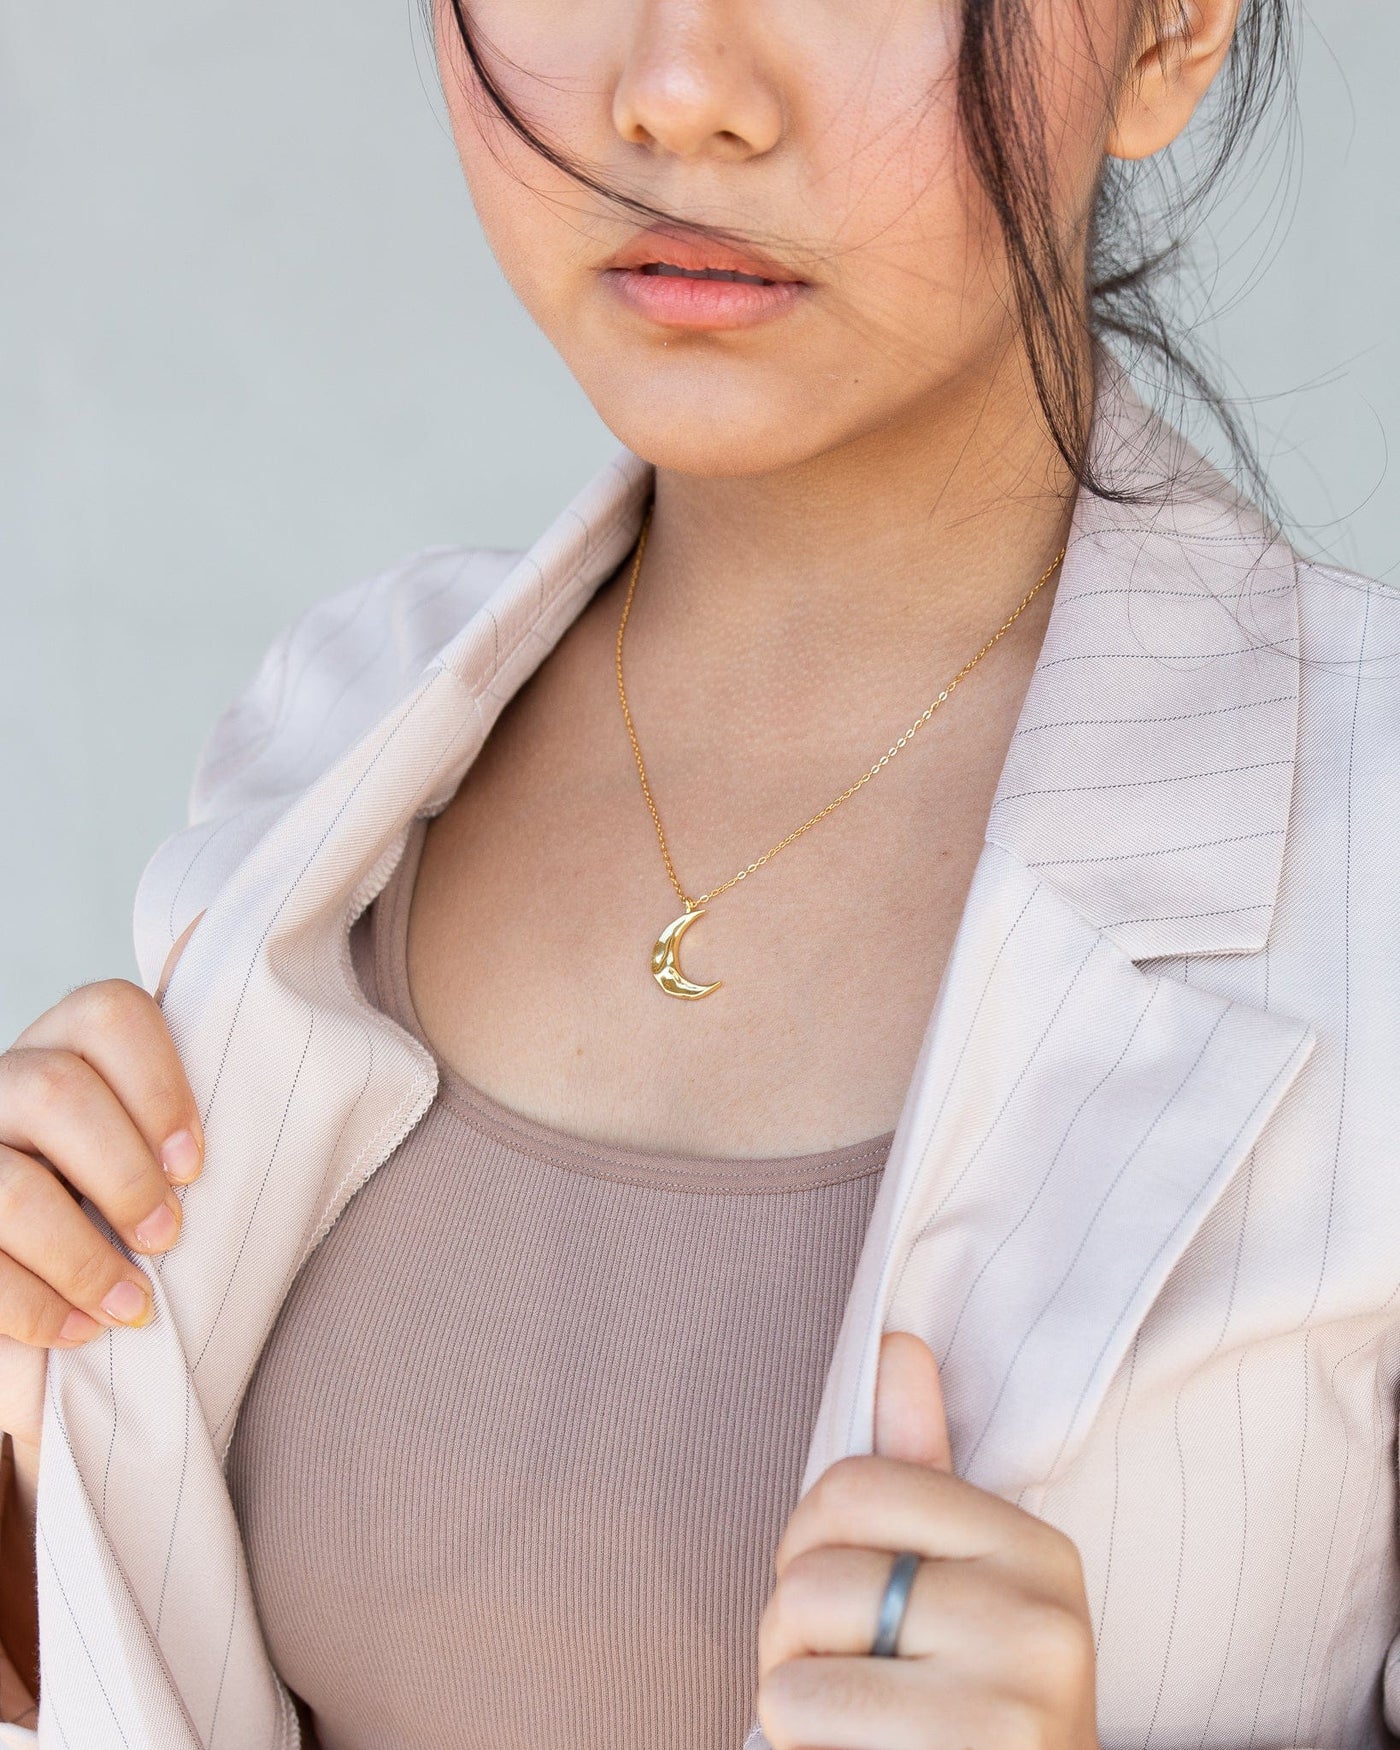 Mingma wearing 18k gold plated sterling silver nolo liquid luna dainty chain link necklace